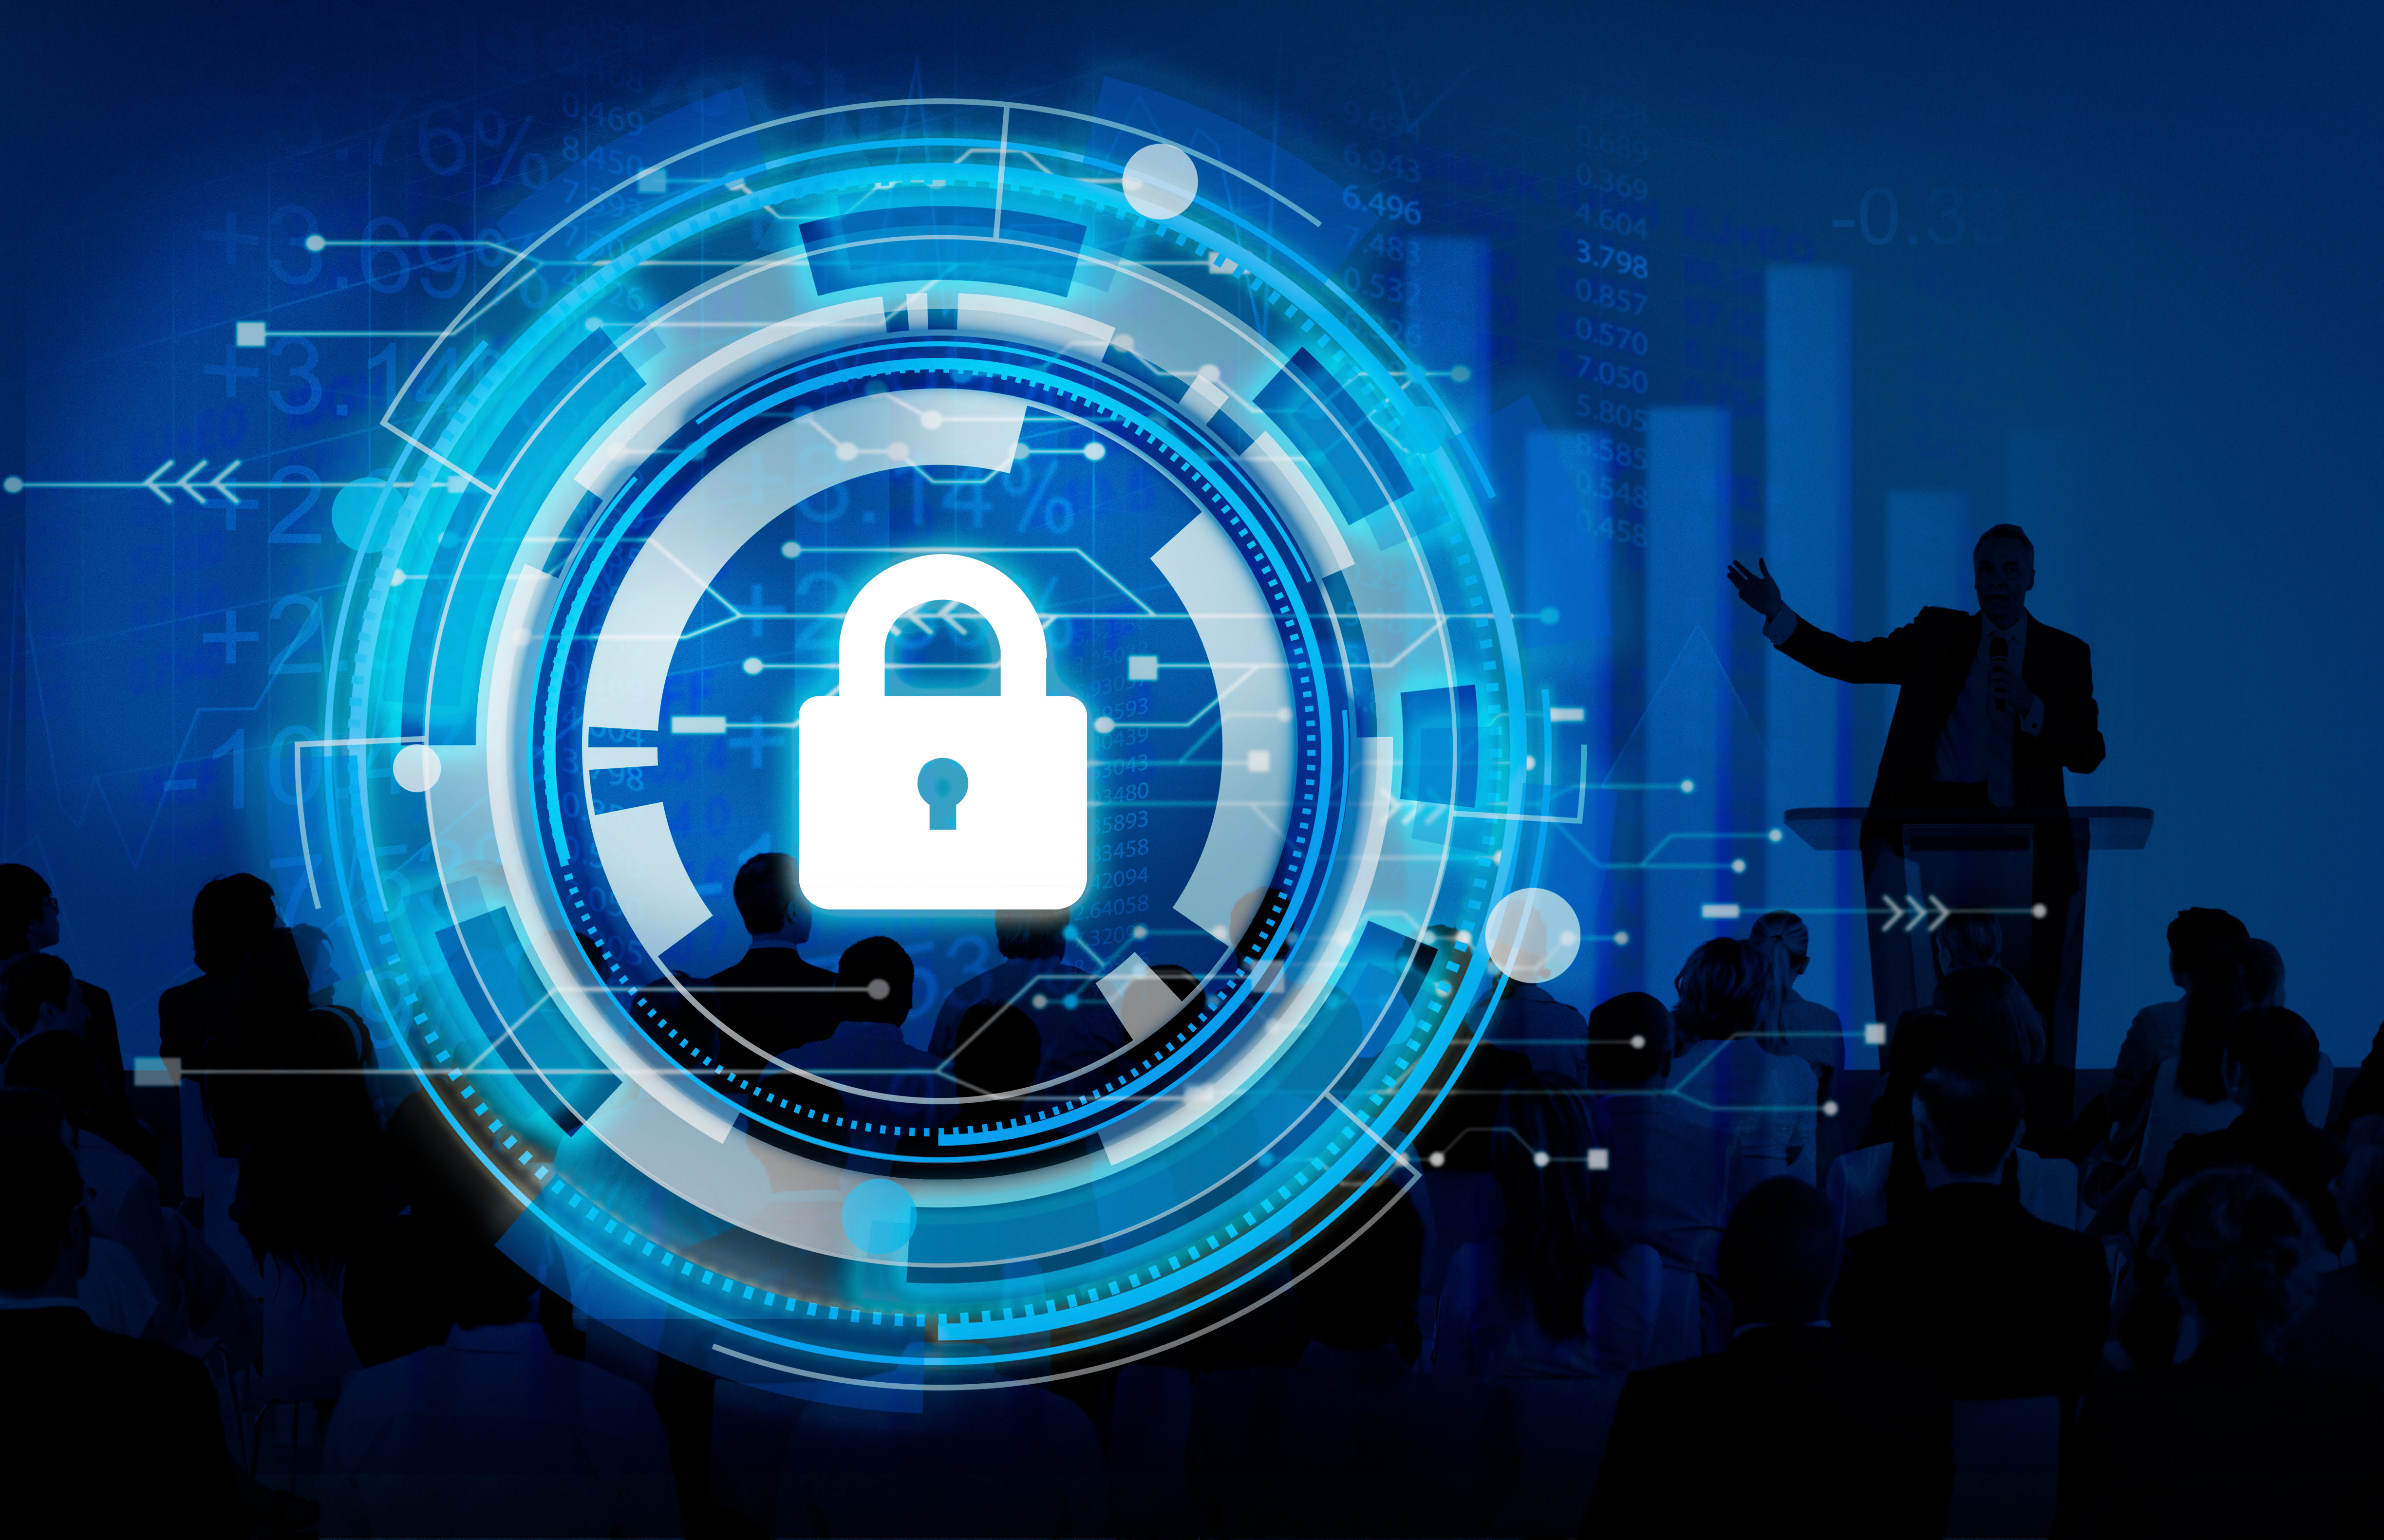 Enhance Your Organization’s Cybersecurity with SIEM